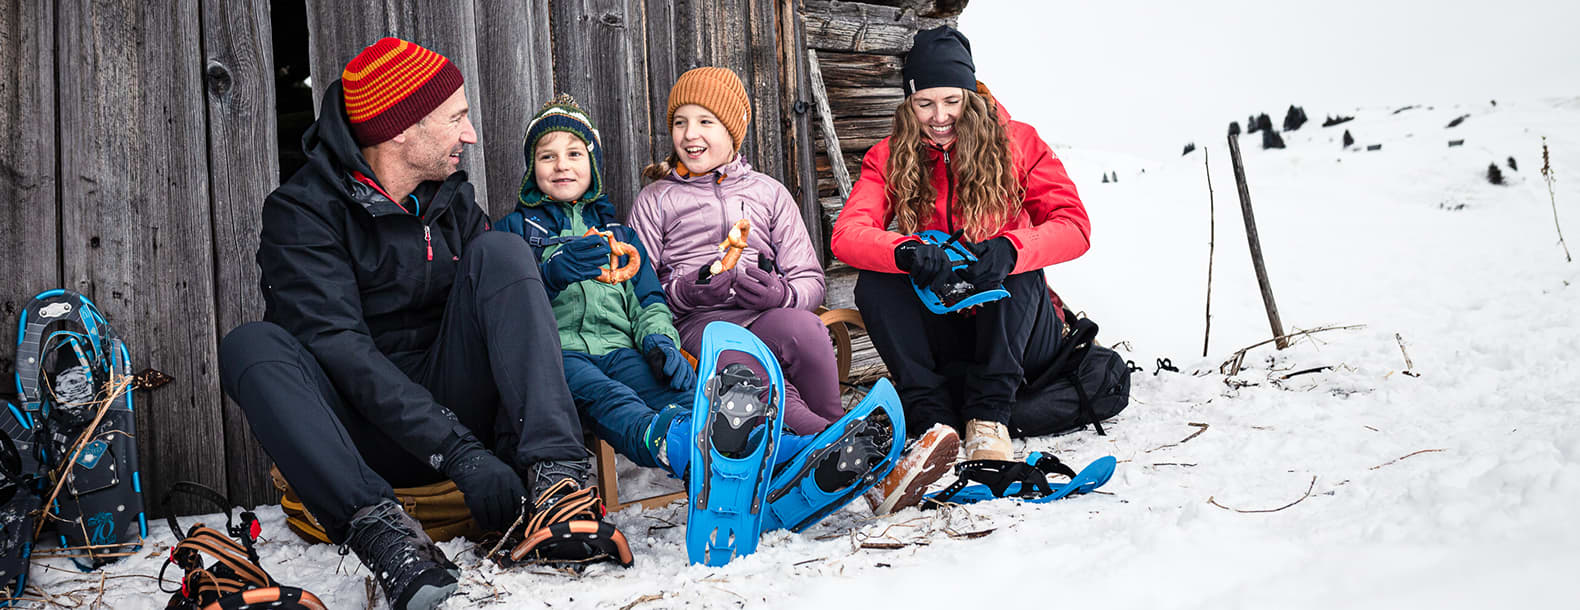 Shop Outdoor Clothing and Footwear for Kids online now